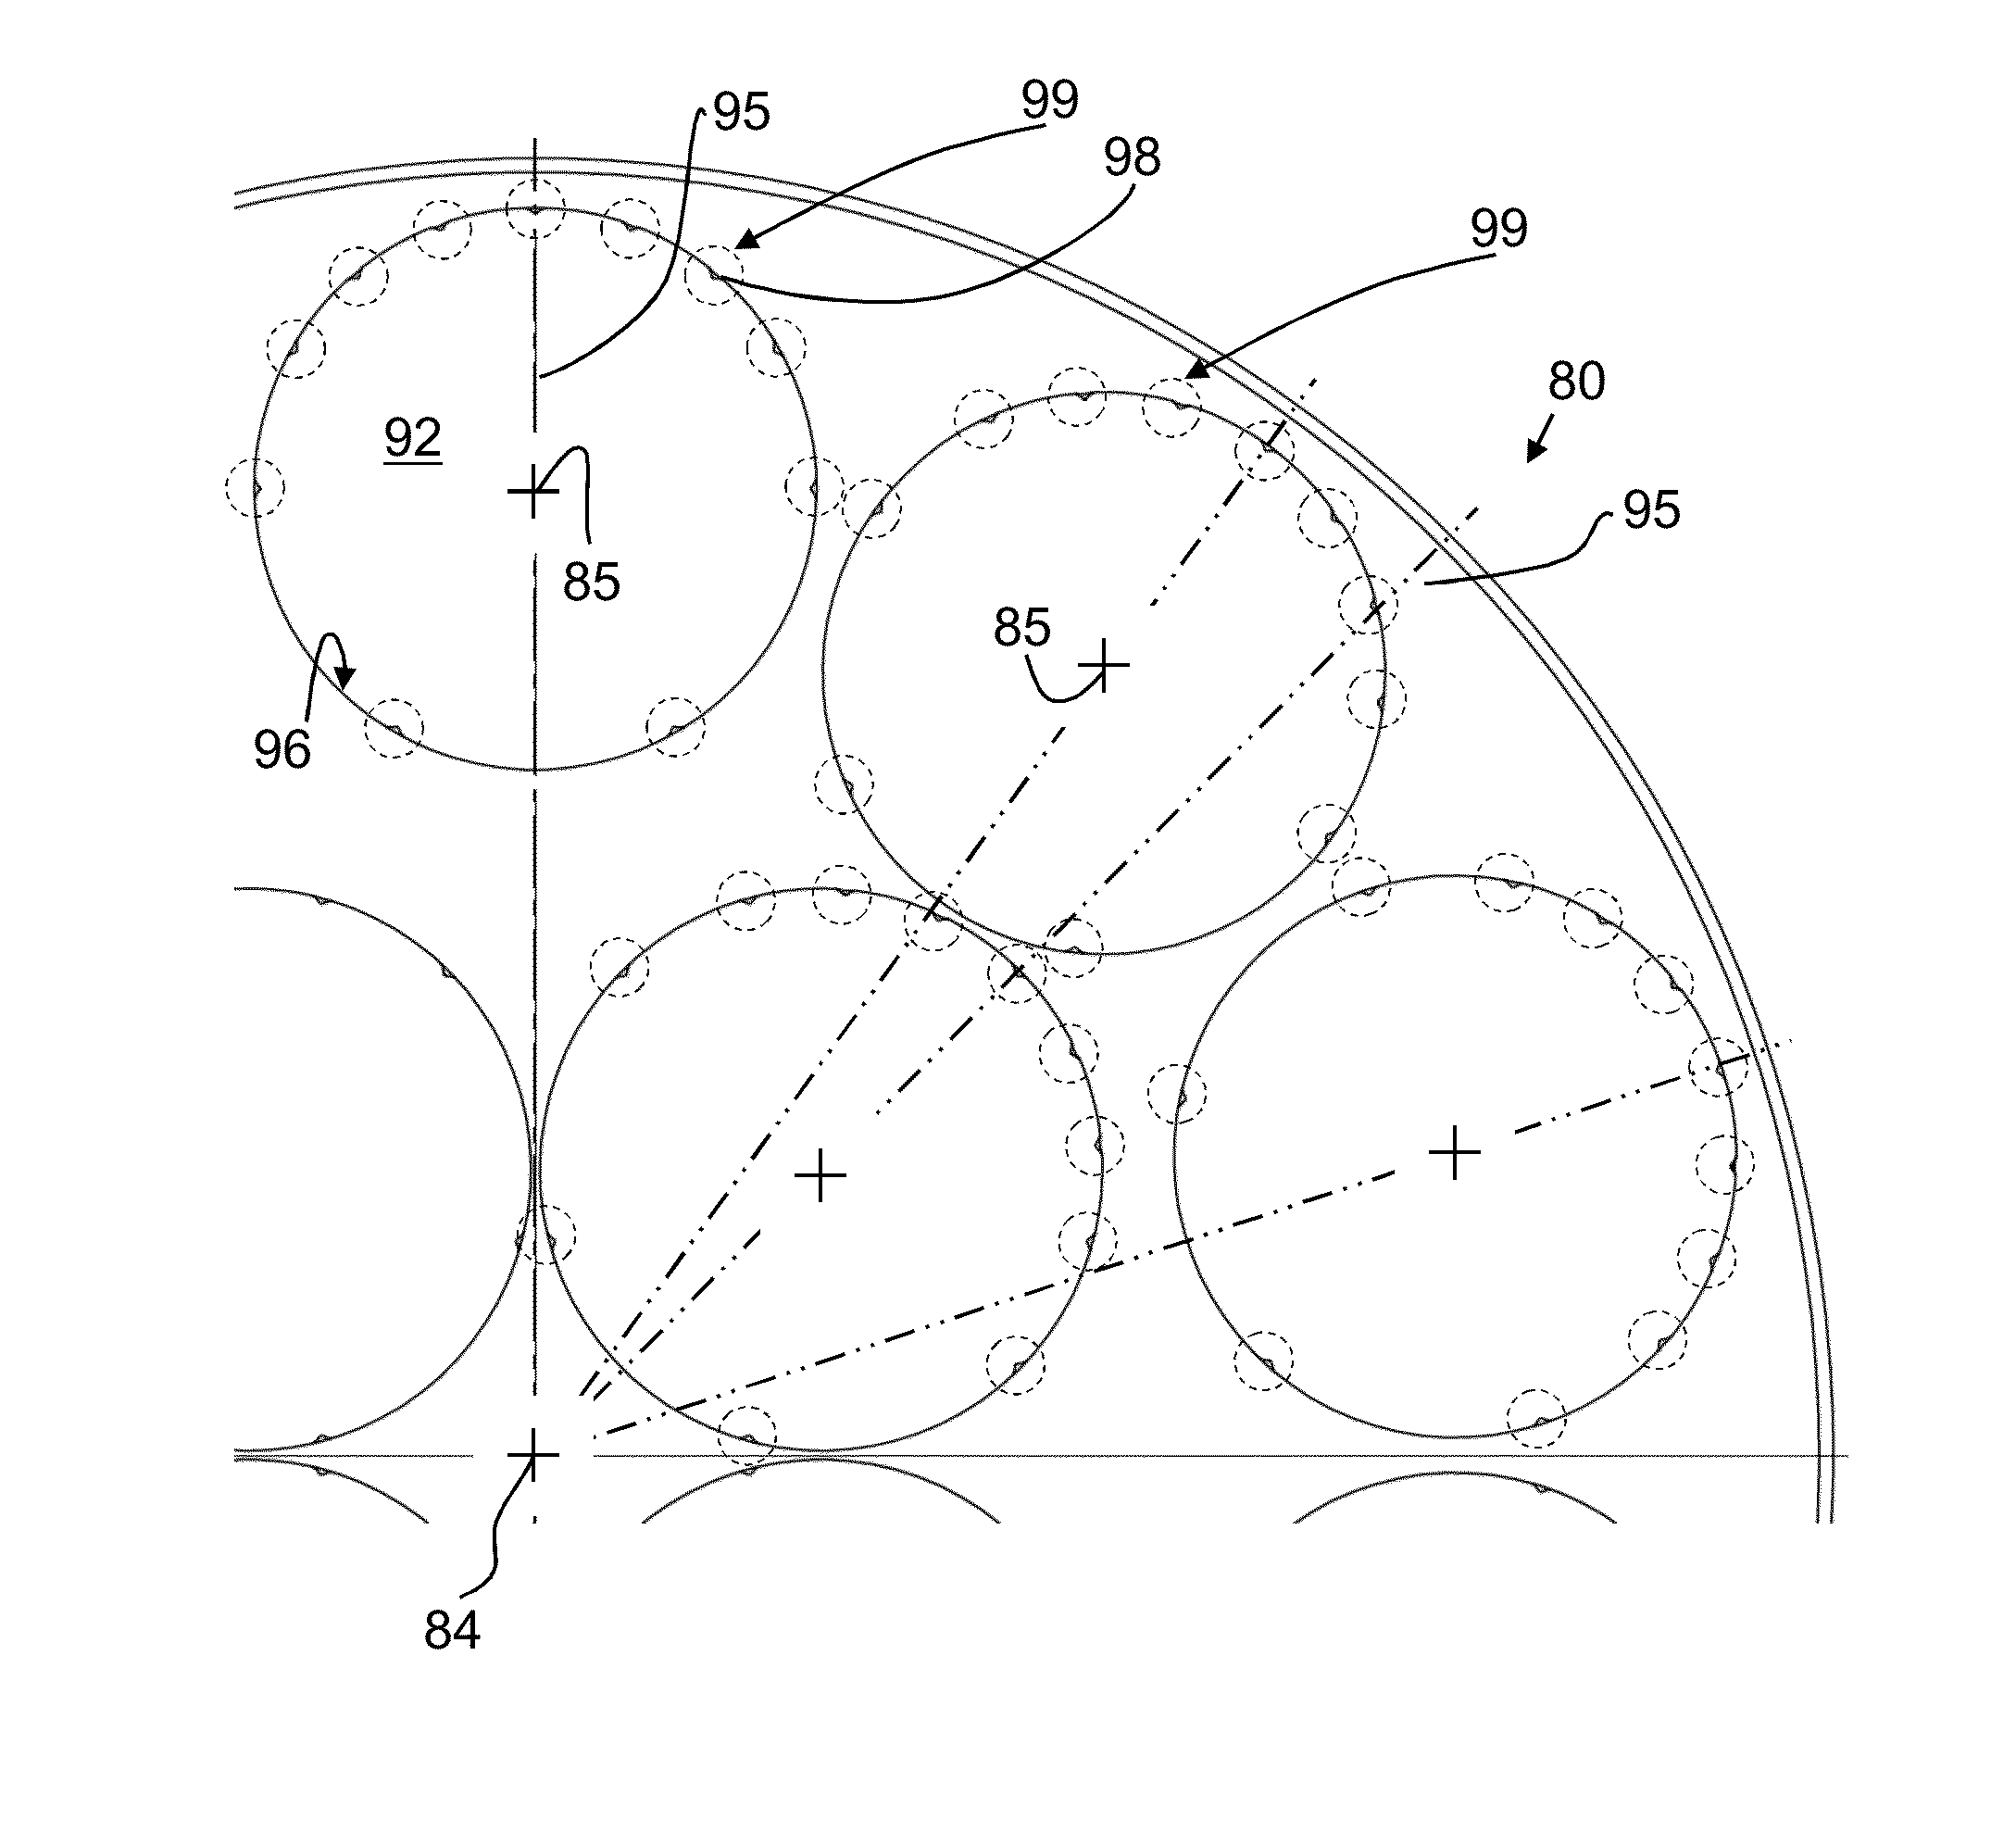 Wafter carrier for chemical vapor deposition systems